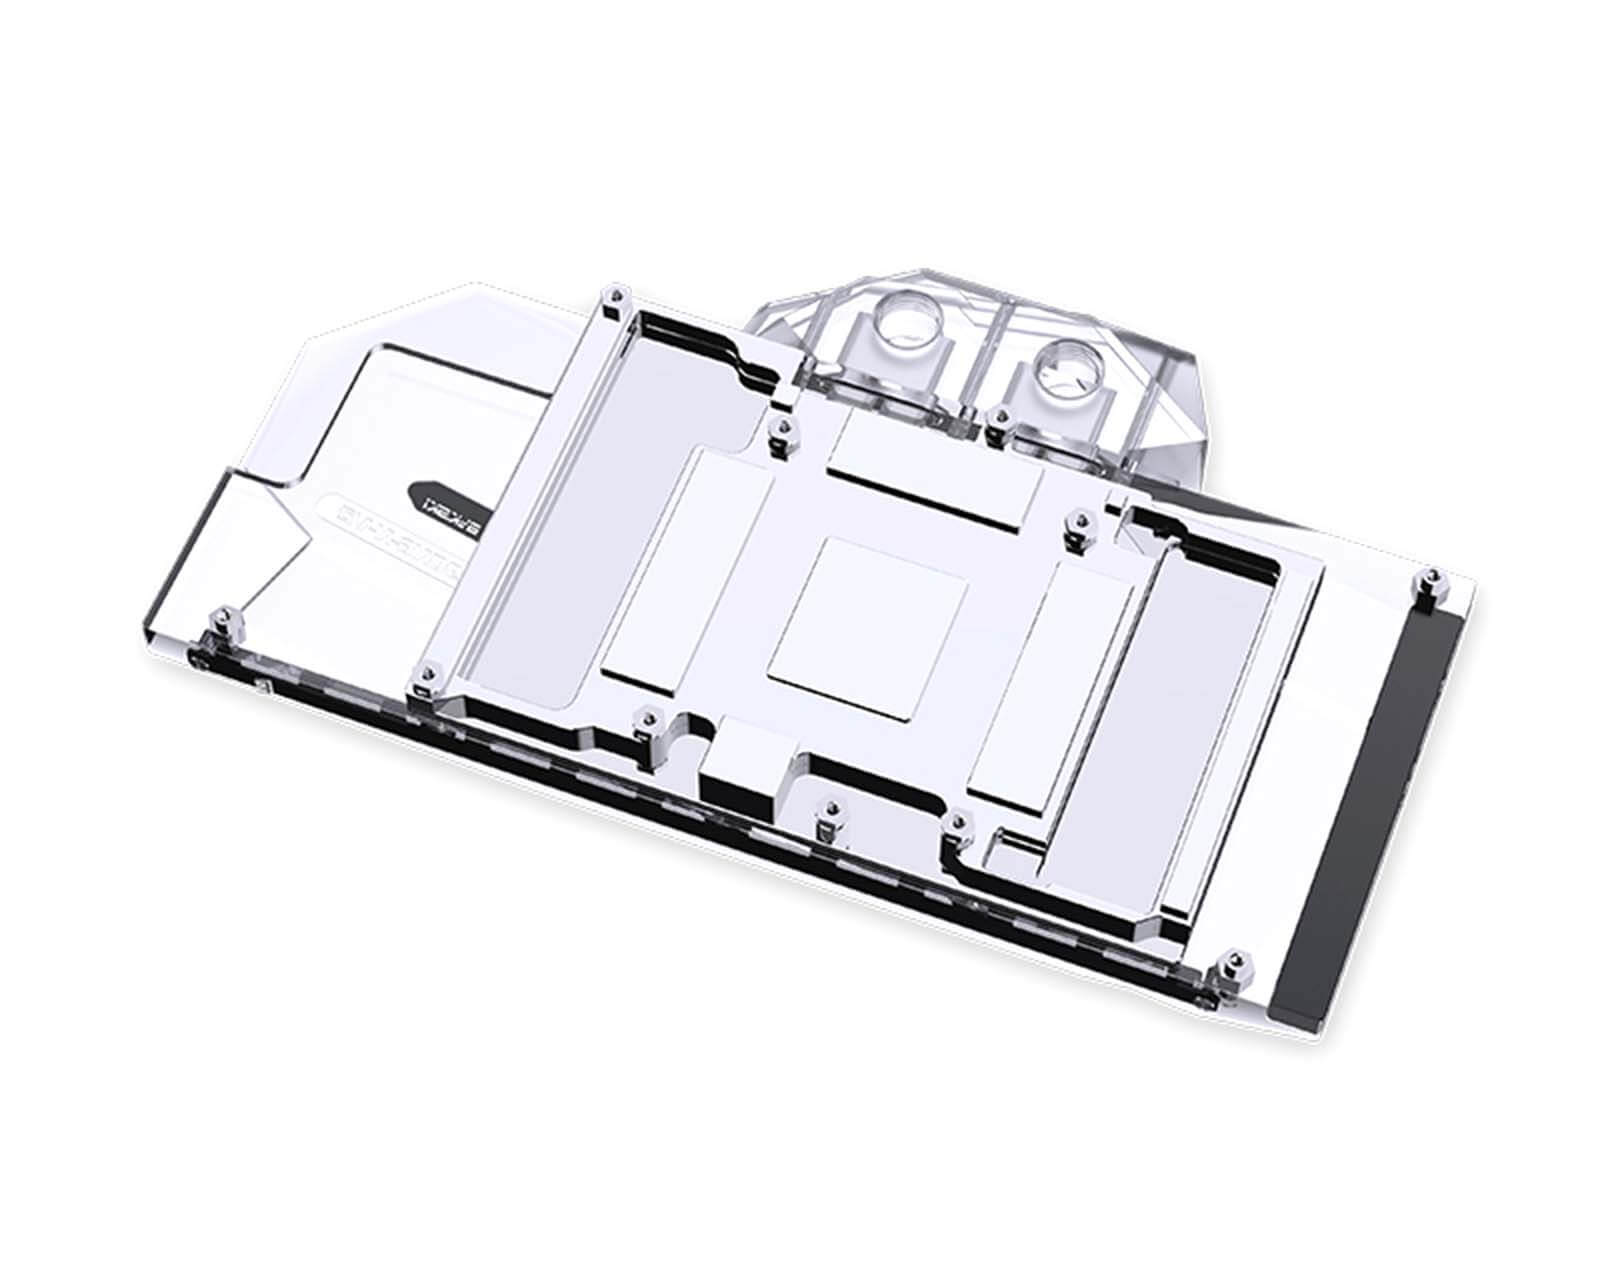 Bykski Full Coverage GPU Water Block and Backplate for AIC Reference RTX 3080/3090 - Version 2 - Black POM (N-RTX3090H-X-V2) - PrimoChill - KEEPING IT COOL